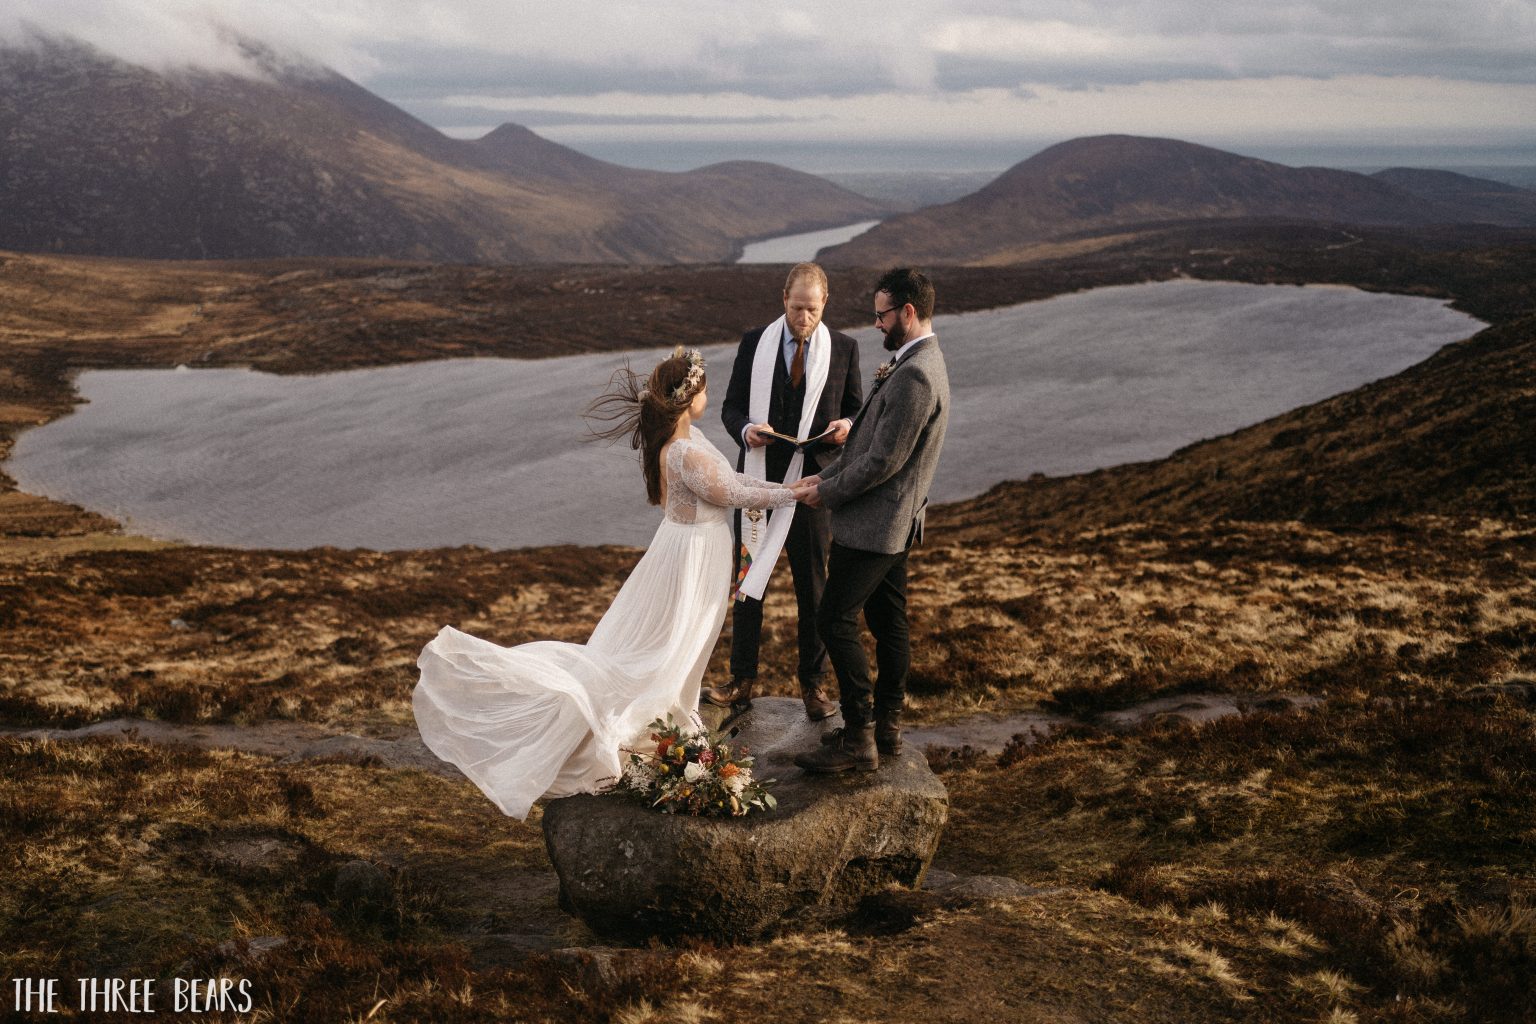 https://www.weddingjournalonline.com/wp-content/uploads/2021/05/Mourne-Mountains-Wedding-Photography-Photos-By-The-Three-Bears-Photography-0218-1-1536x1024.jpg